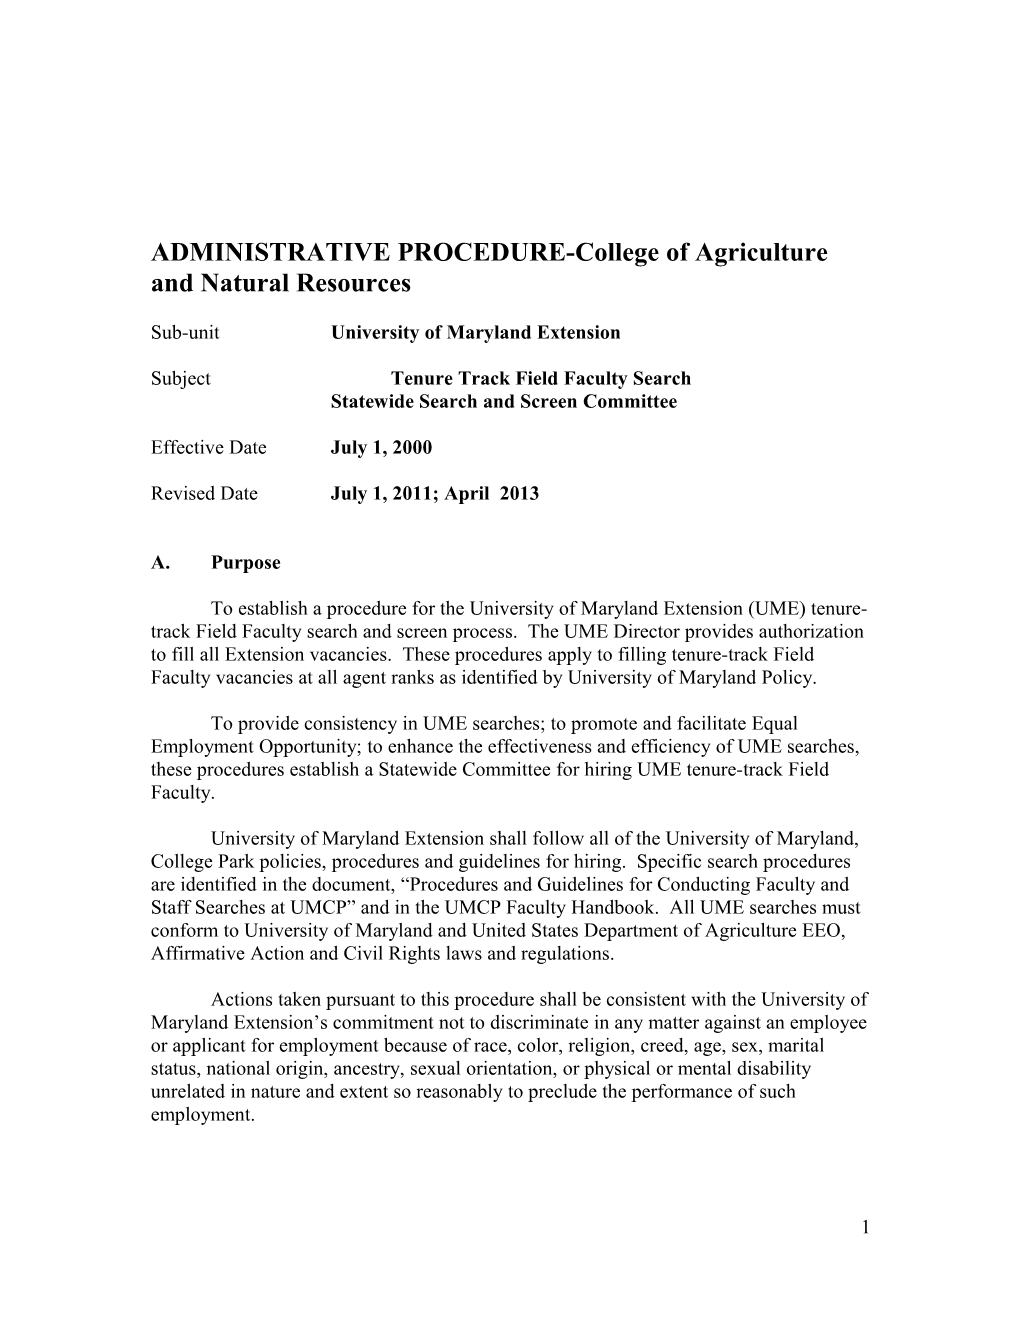 ADMINISTRATIVE PROCEDURE-College of Agriculture and Natural Resources